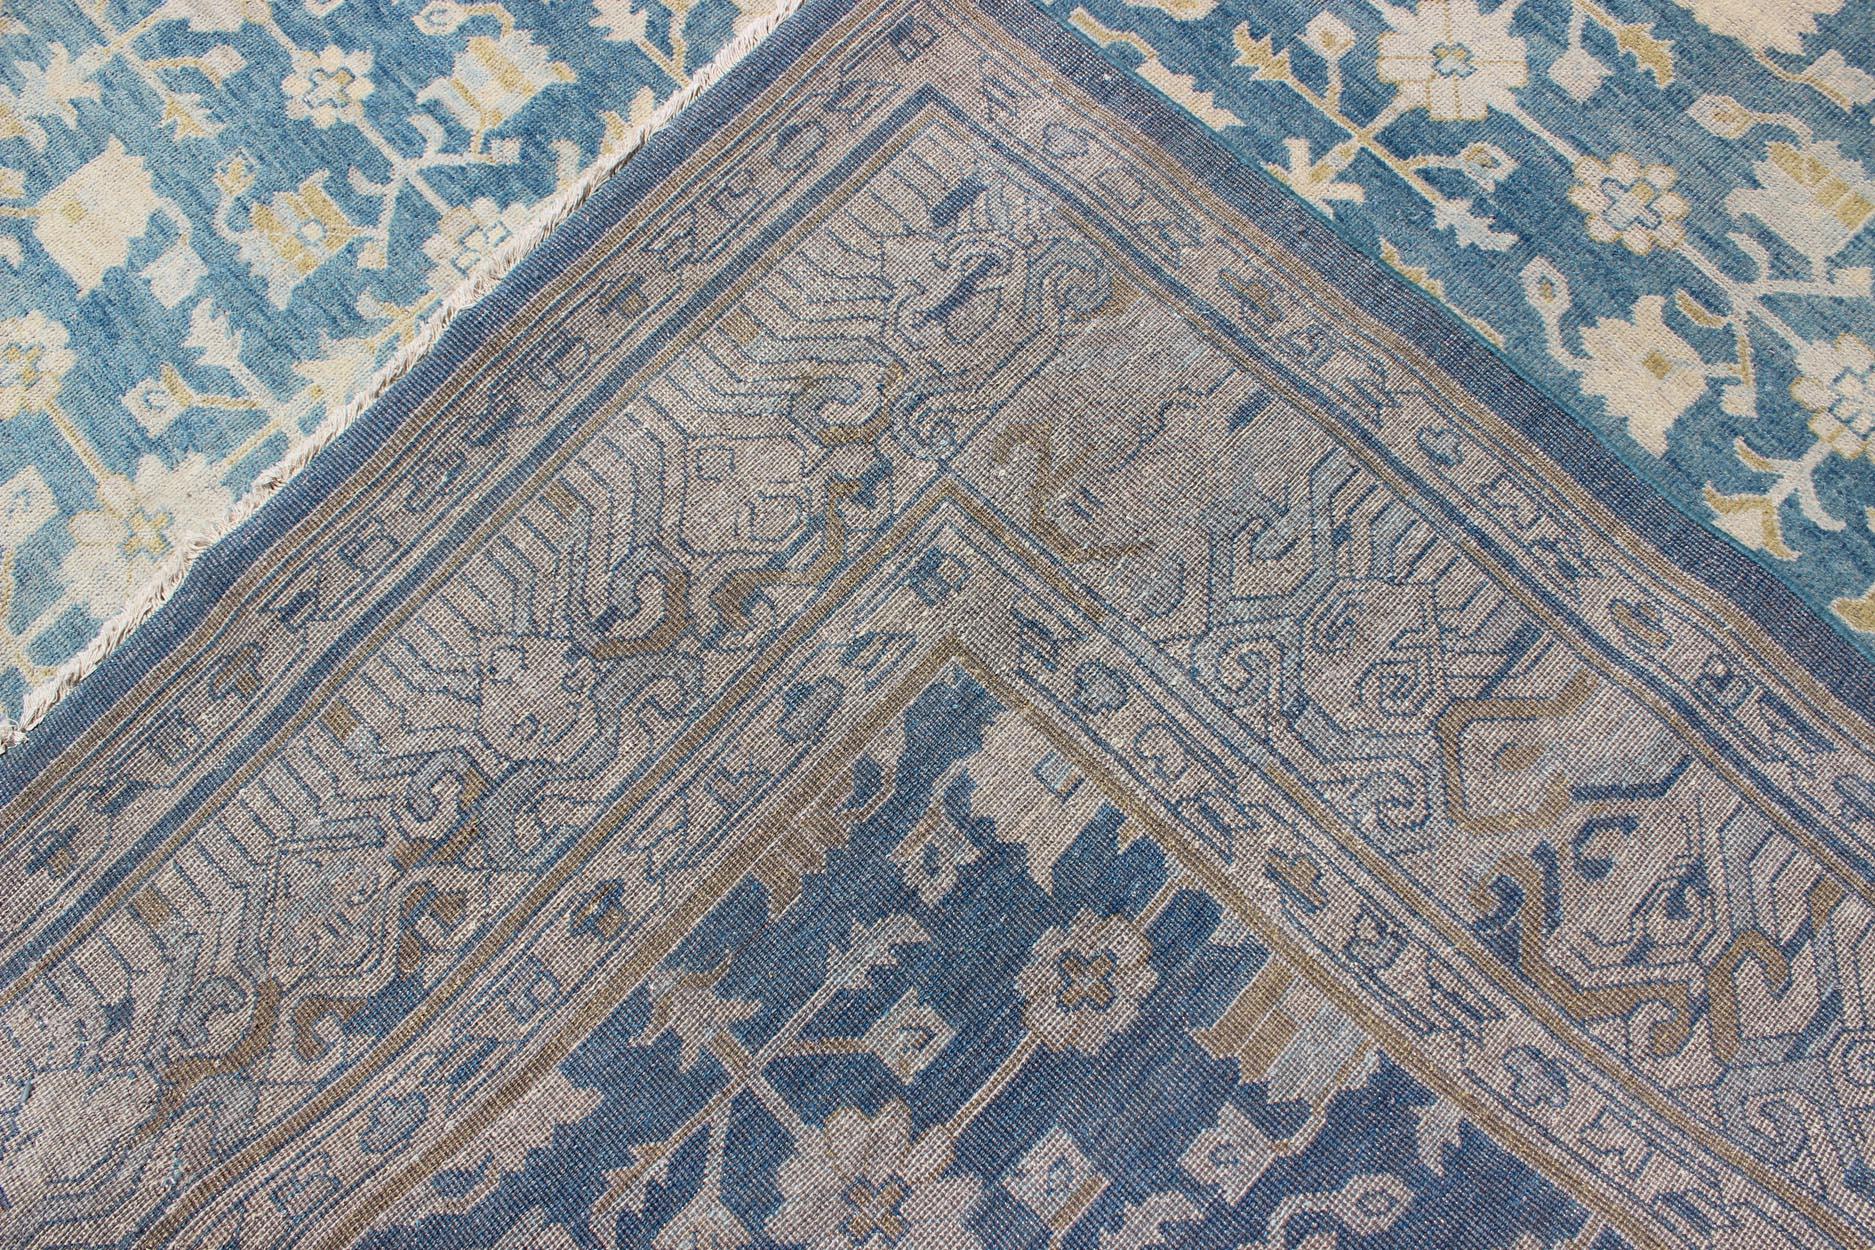 Contemporary Khotan Design Rug with All-Over Sub-Geometric Pattern in Blue, Tan & Gold For Sale